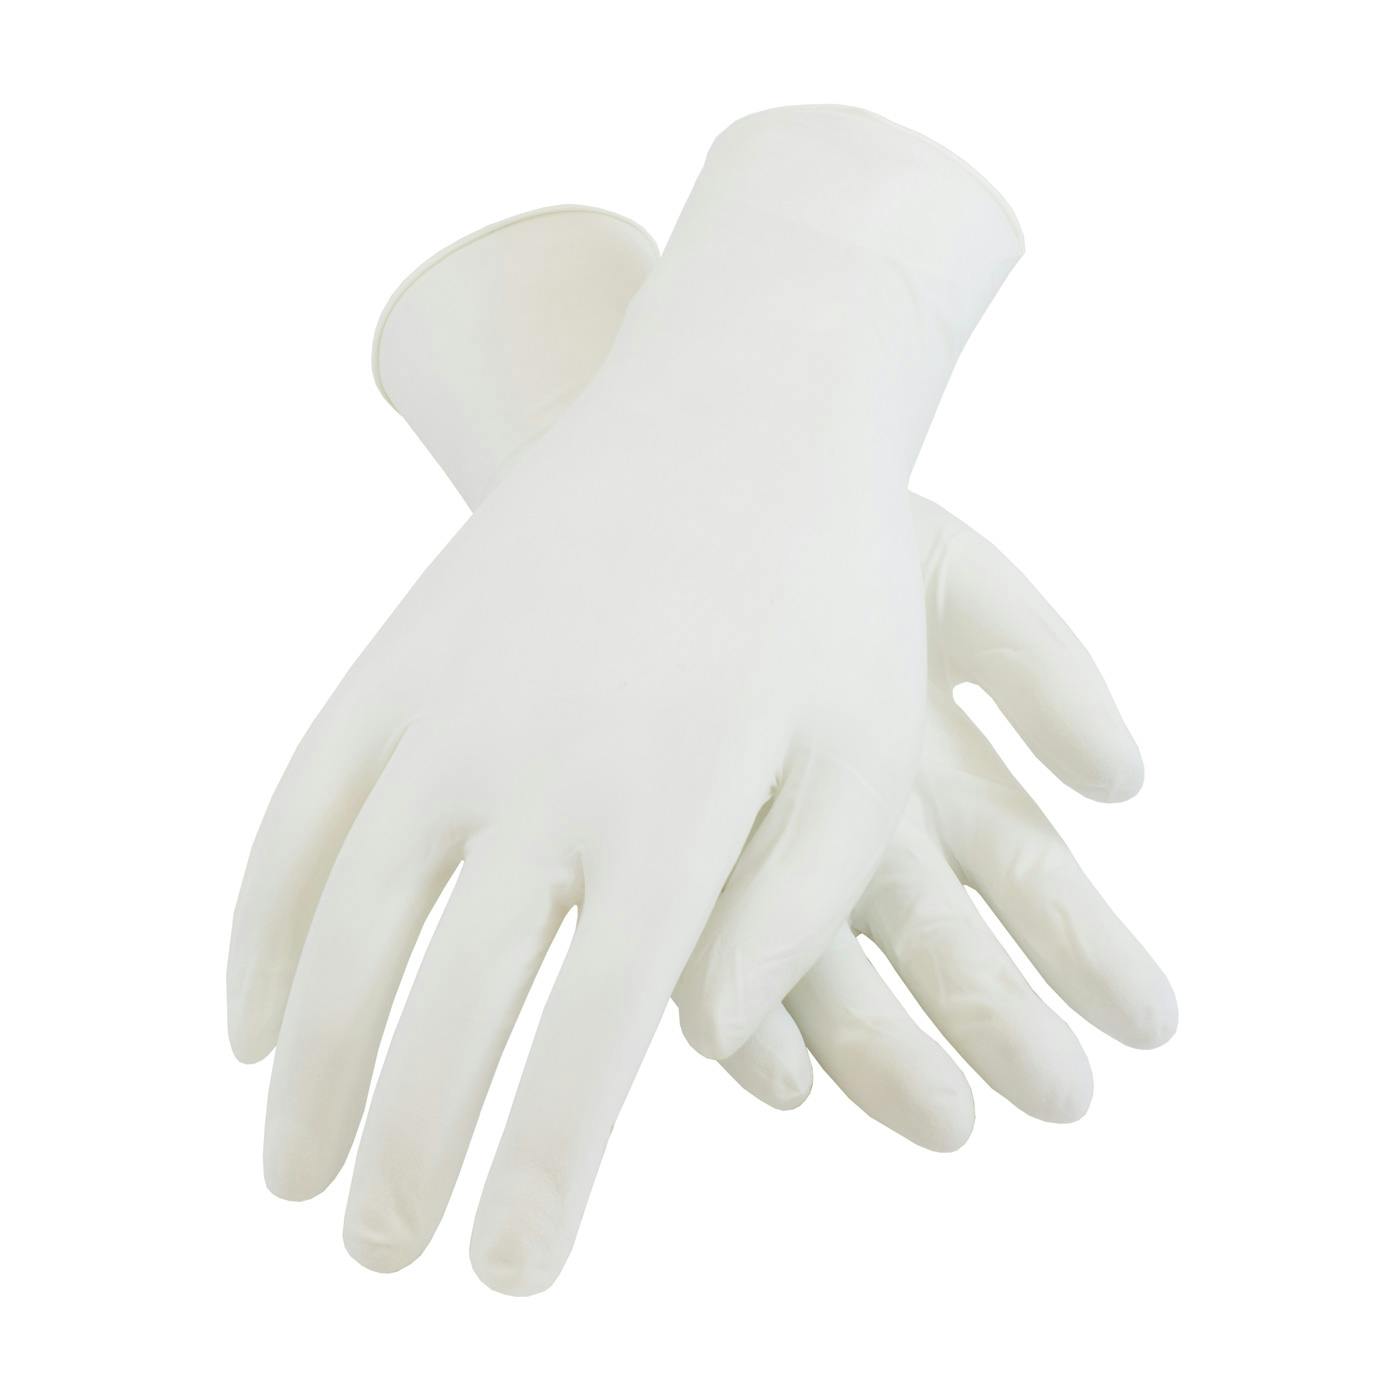 CleanTeam® Single Use Class 100 Cleanroom Nitrile Glove with Finger Textured Grip - 9.5" (100-332400)_0